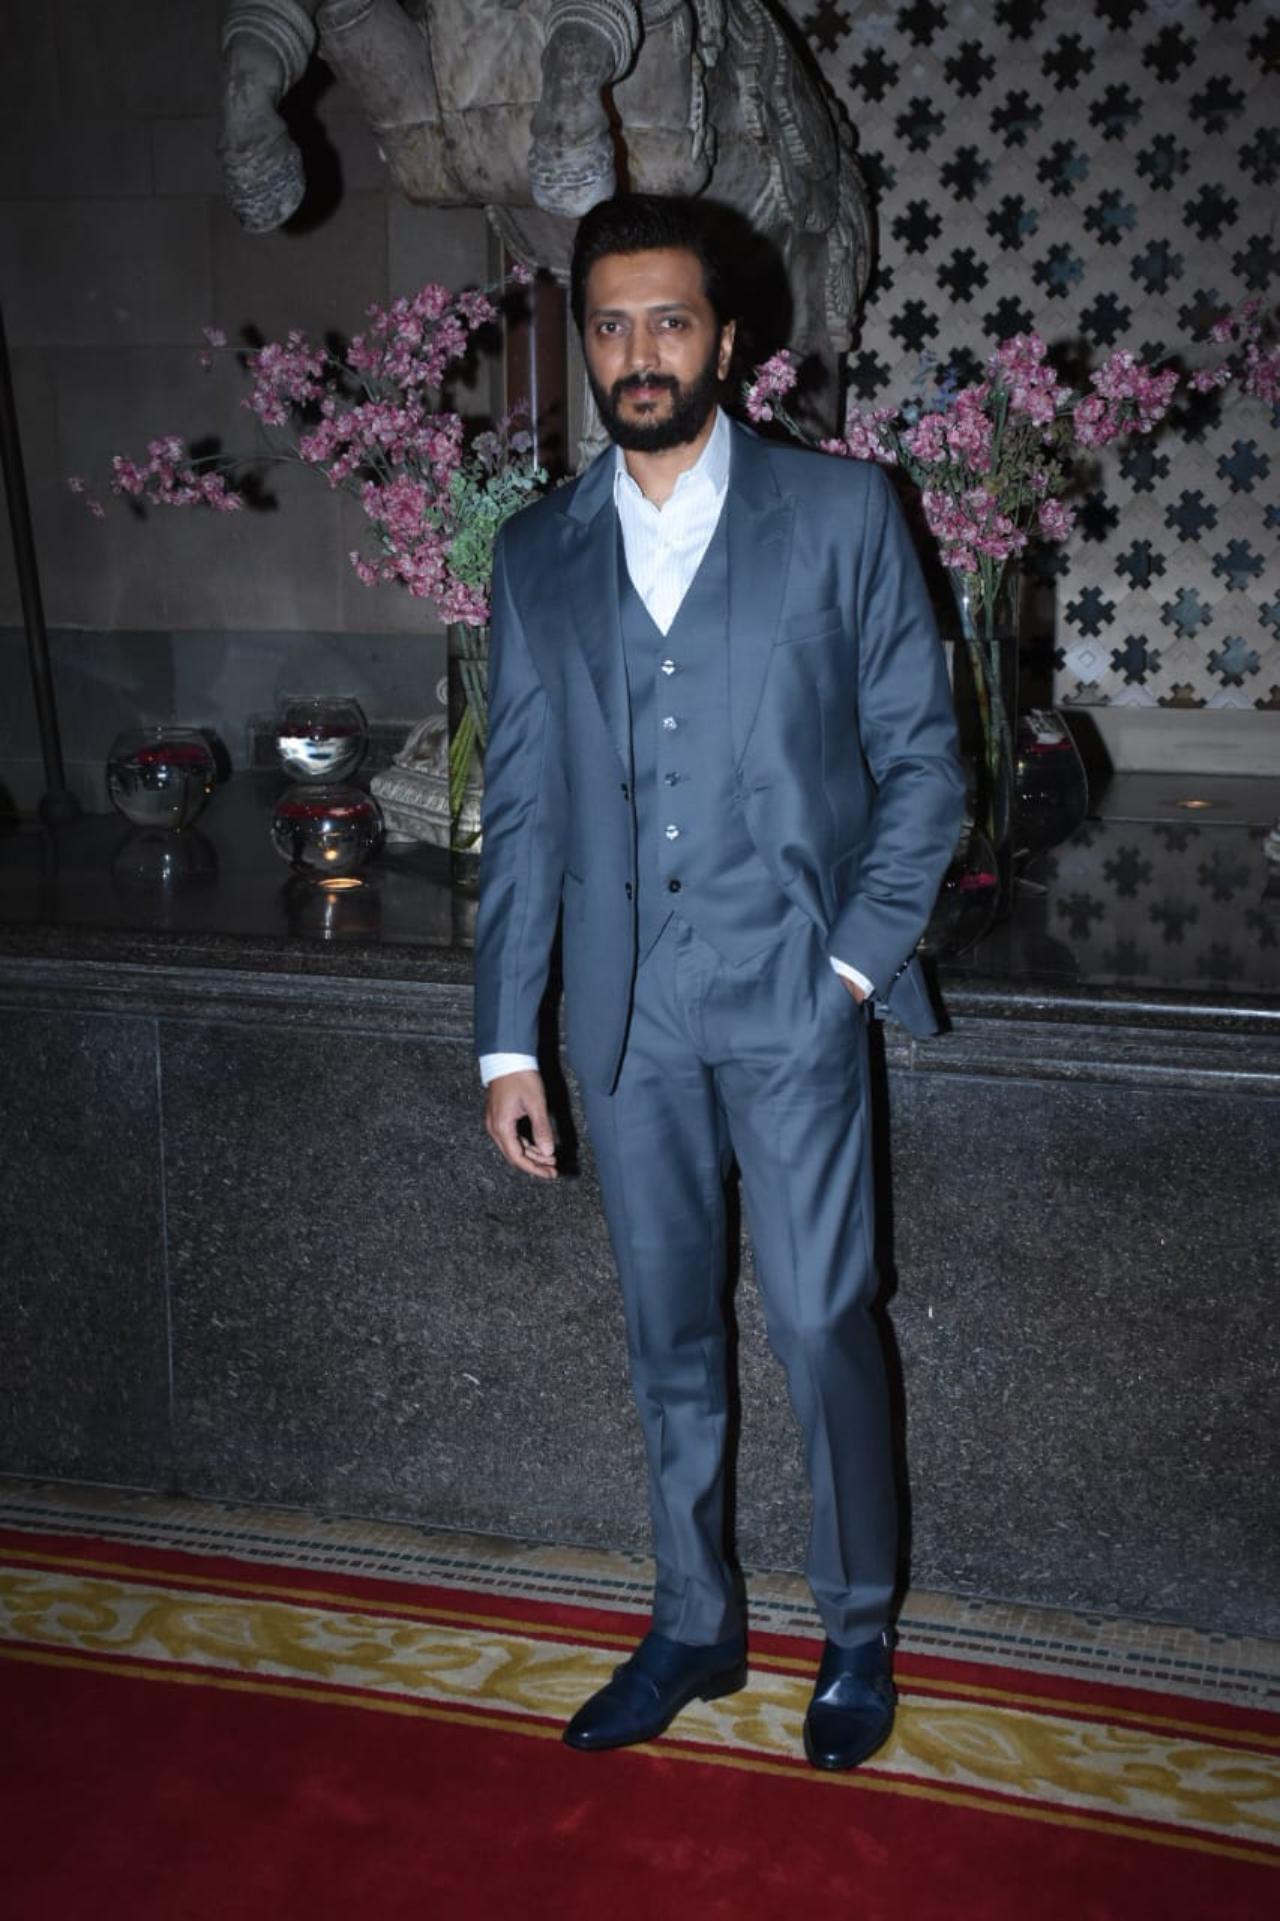 Riteish Deshmukh looked dapper in a grey suit. The actor who is reeling in the success of his recently released film Ved arrived solo for the party